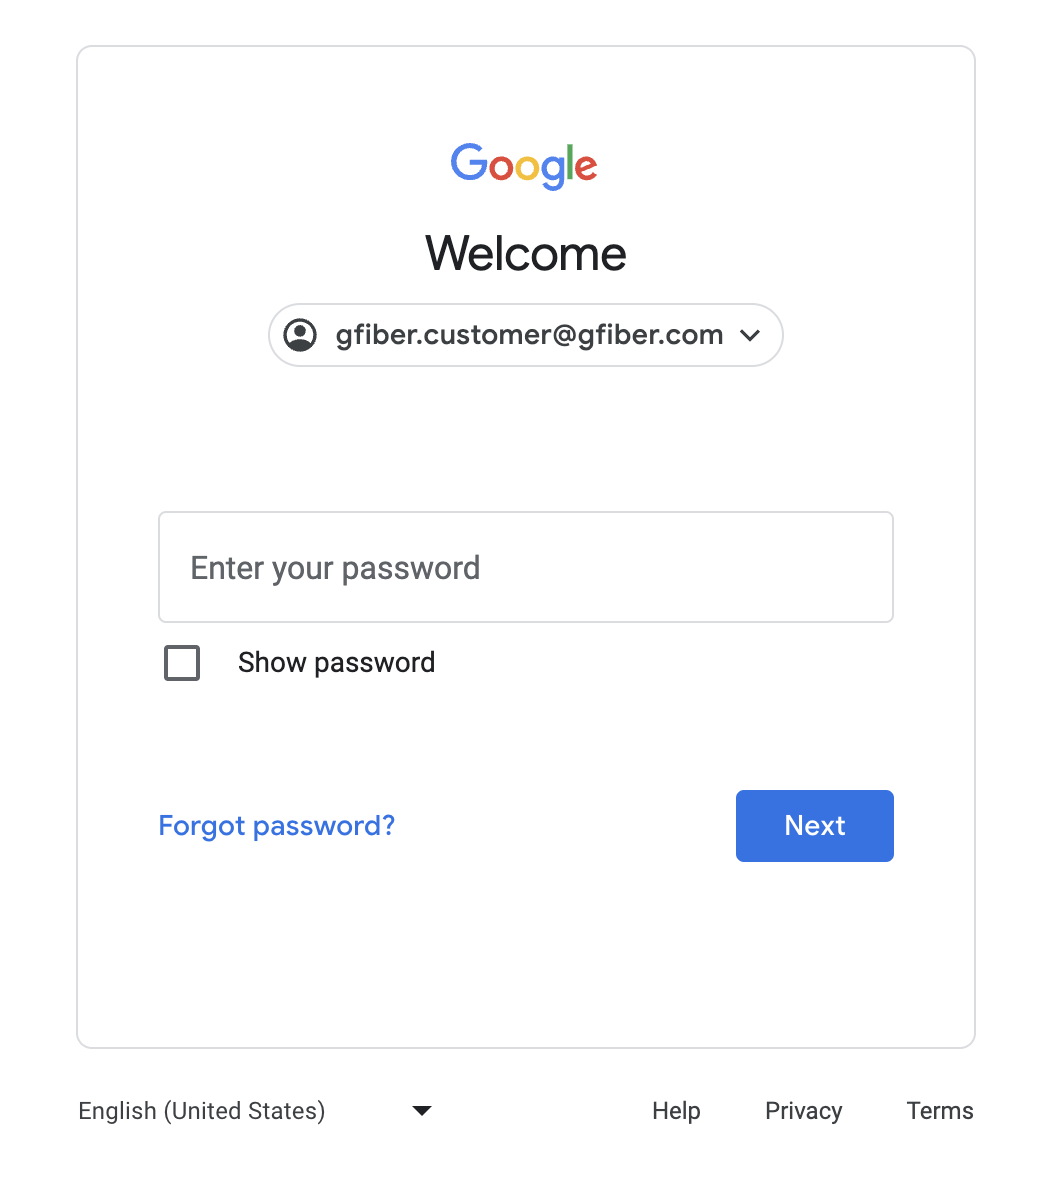 The Google "enter password" page. The account "gfiber.customer@gfiber.com" is selected, and an empty password field is shown. At the bottom of the screen are buttons for "Next" and "Forgot password?"